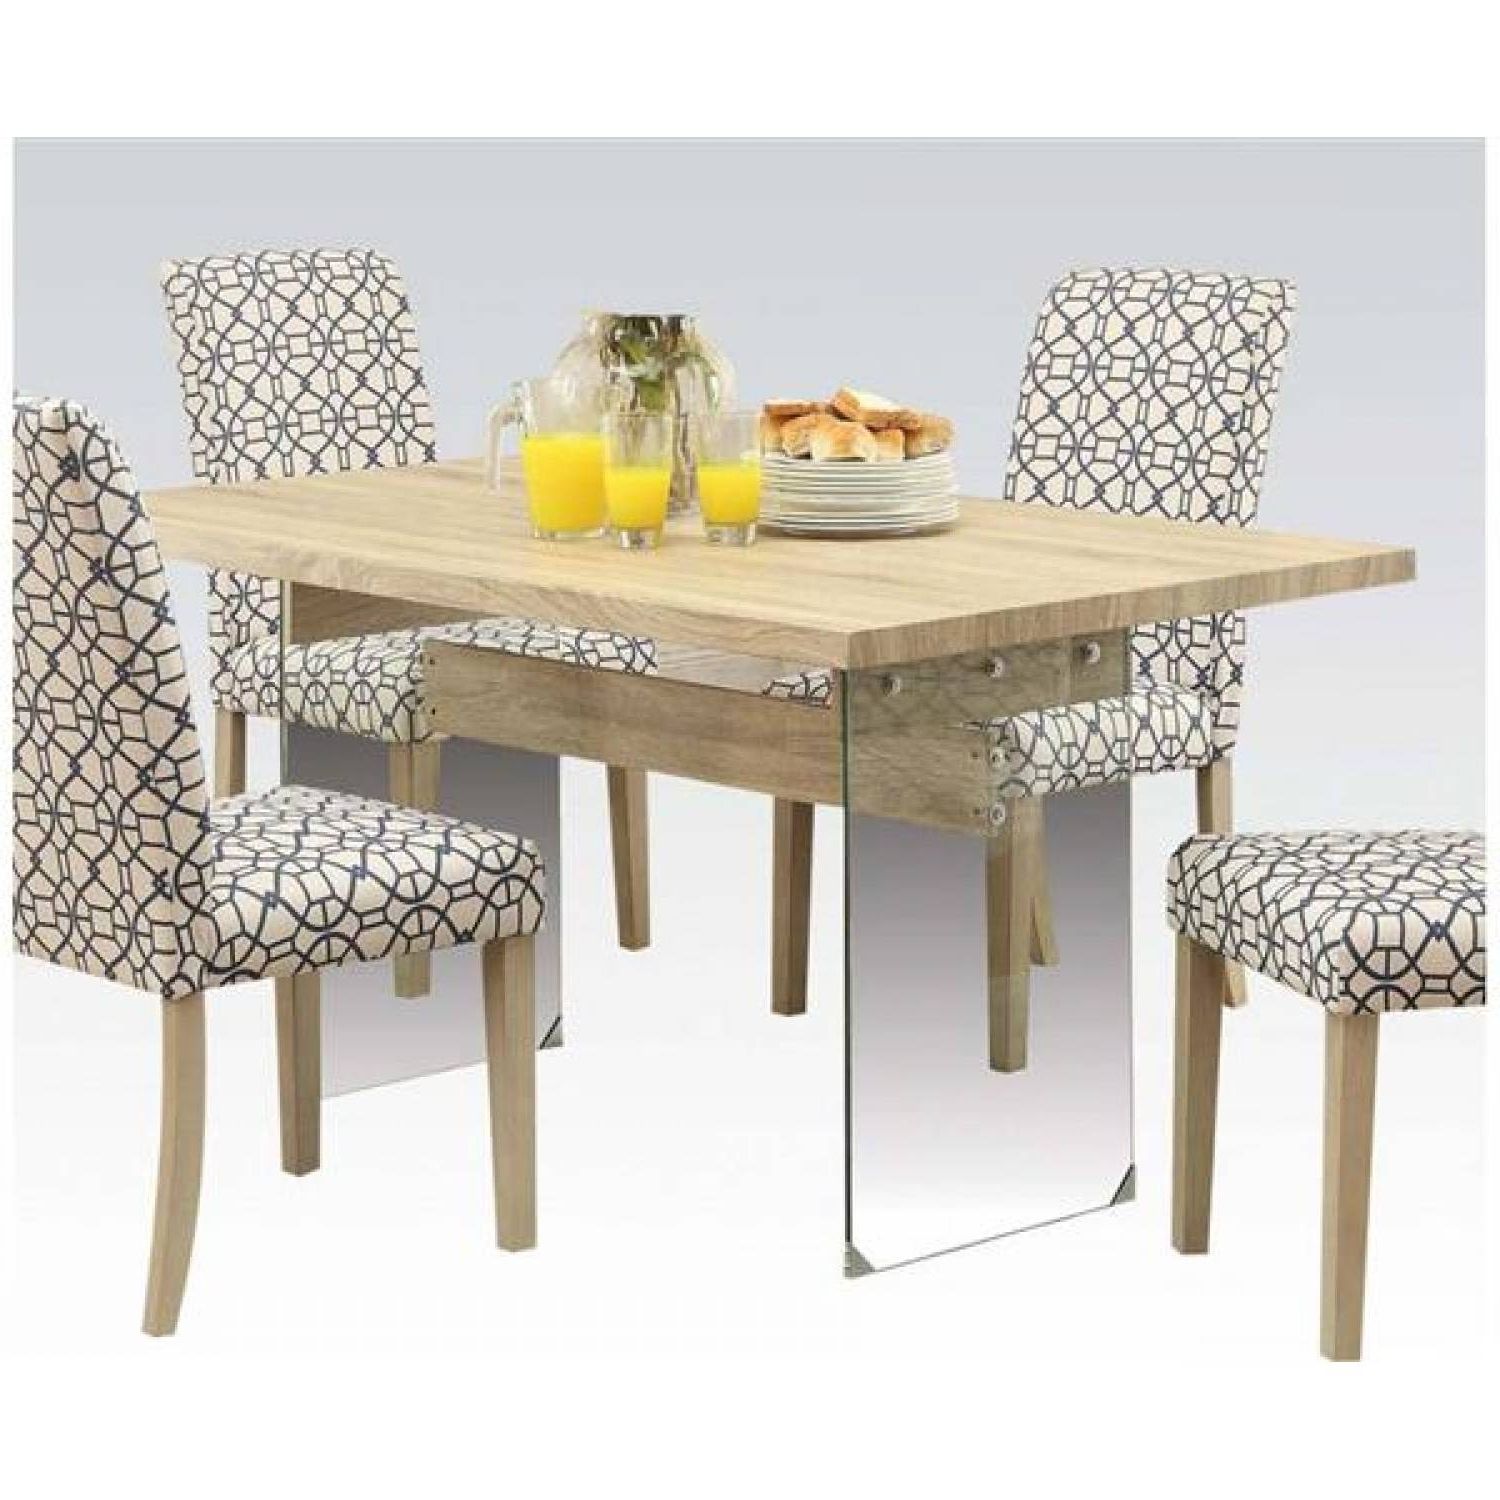 Glassden Light Oak Wood Glass Dining Table 5pc Set: Table & 4 Chairs Throughout Current Cheap Glass Dining Tables And 4 Chairs (Photo 22 of 25)